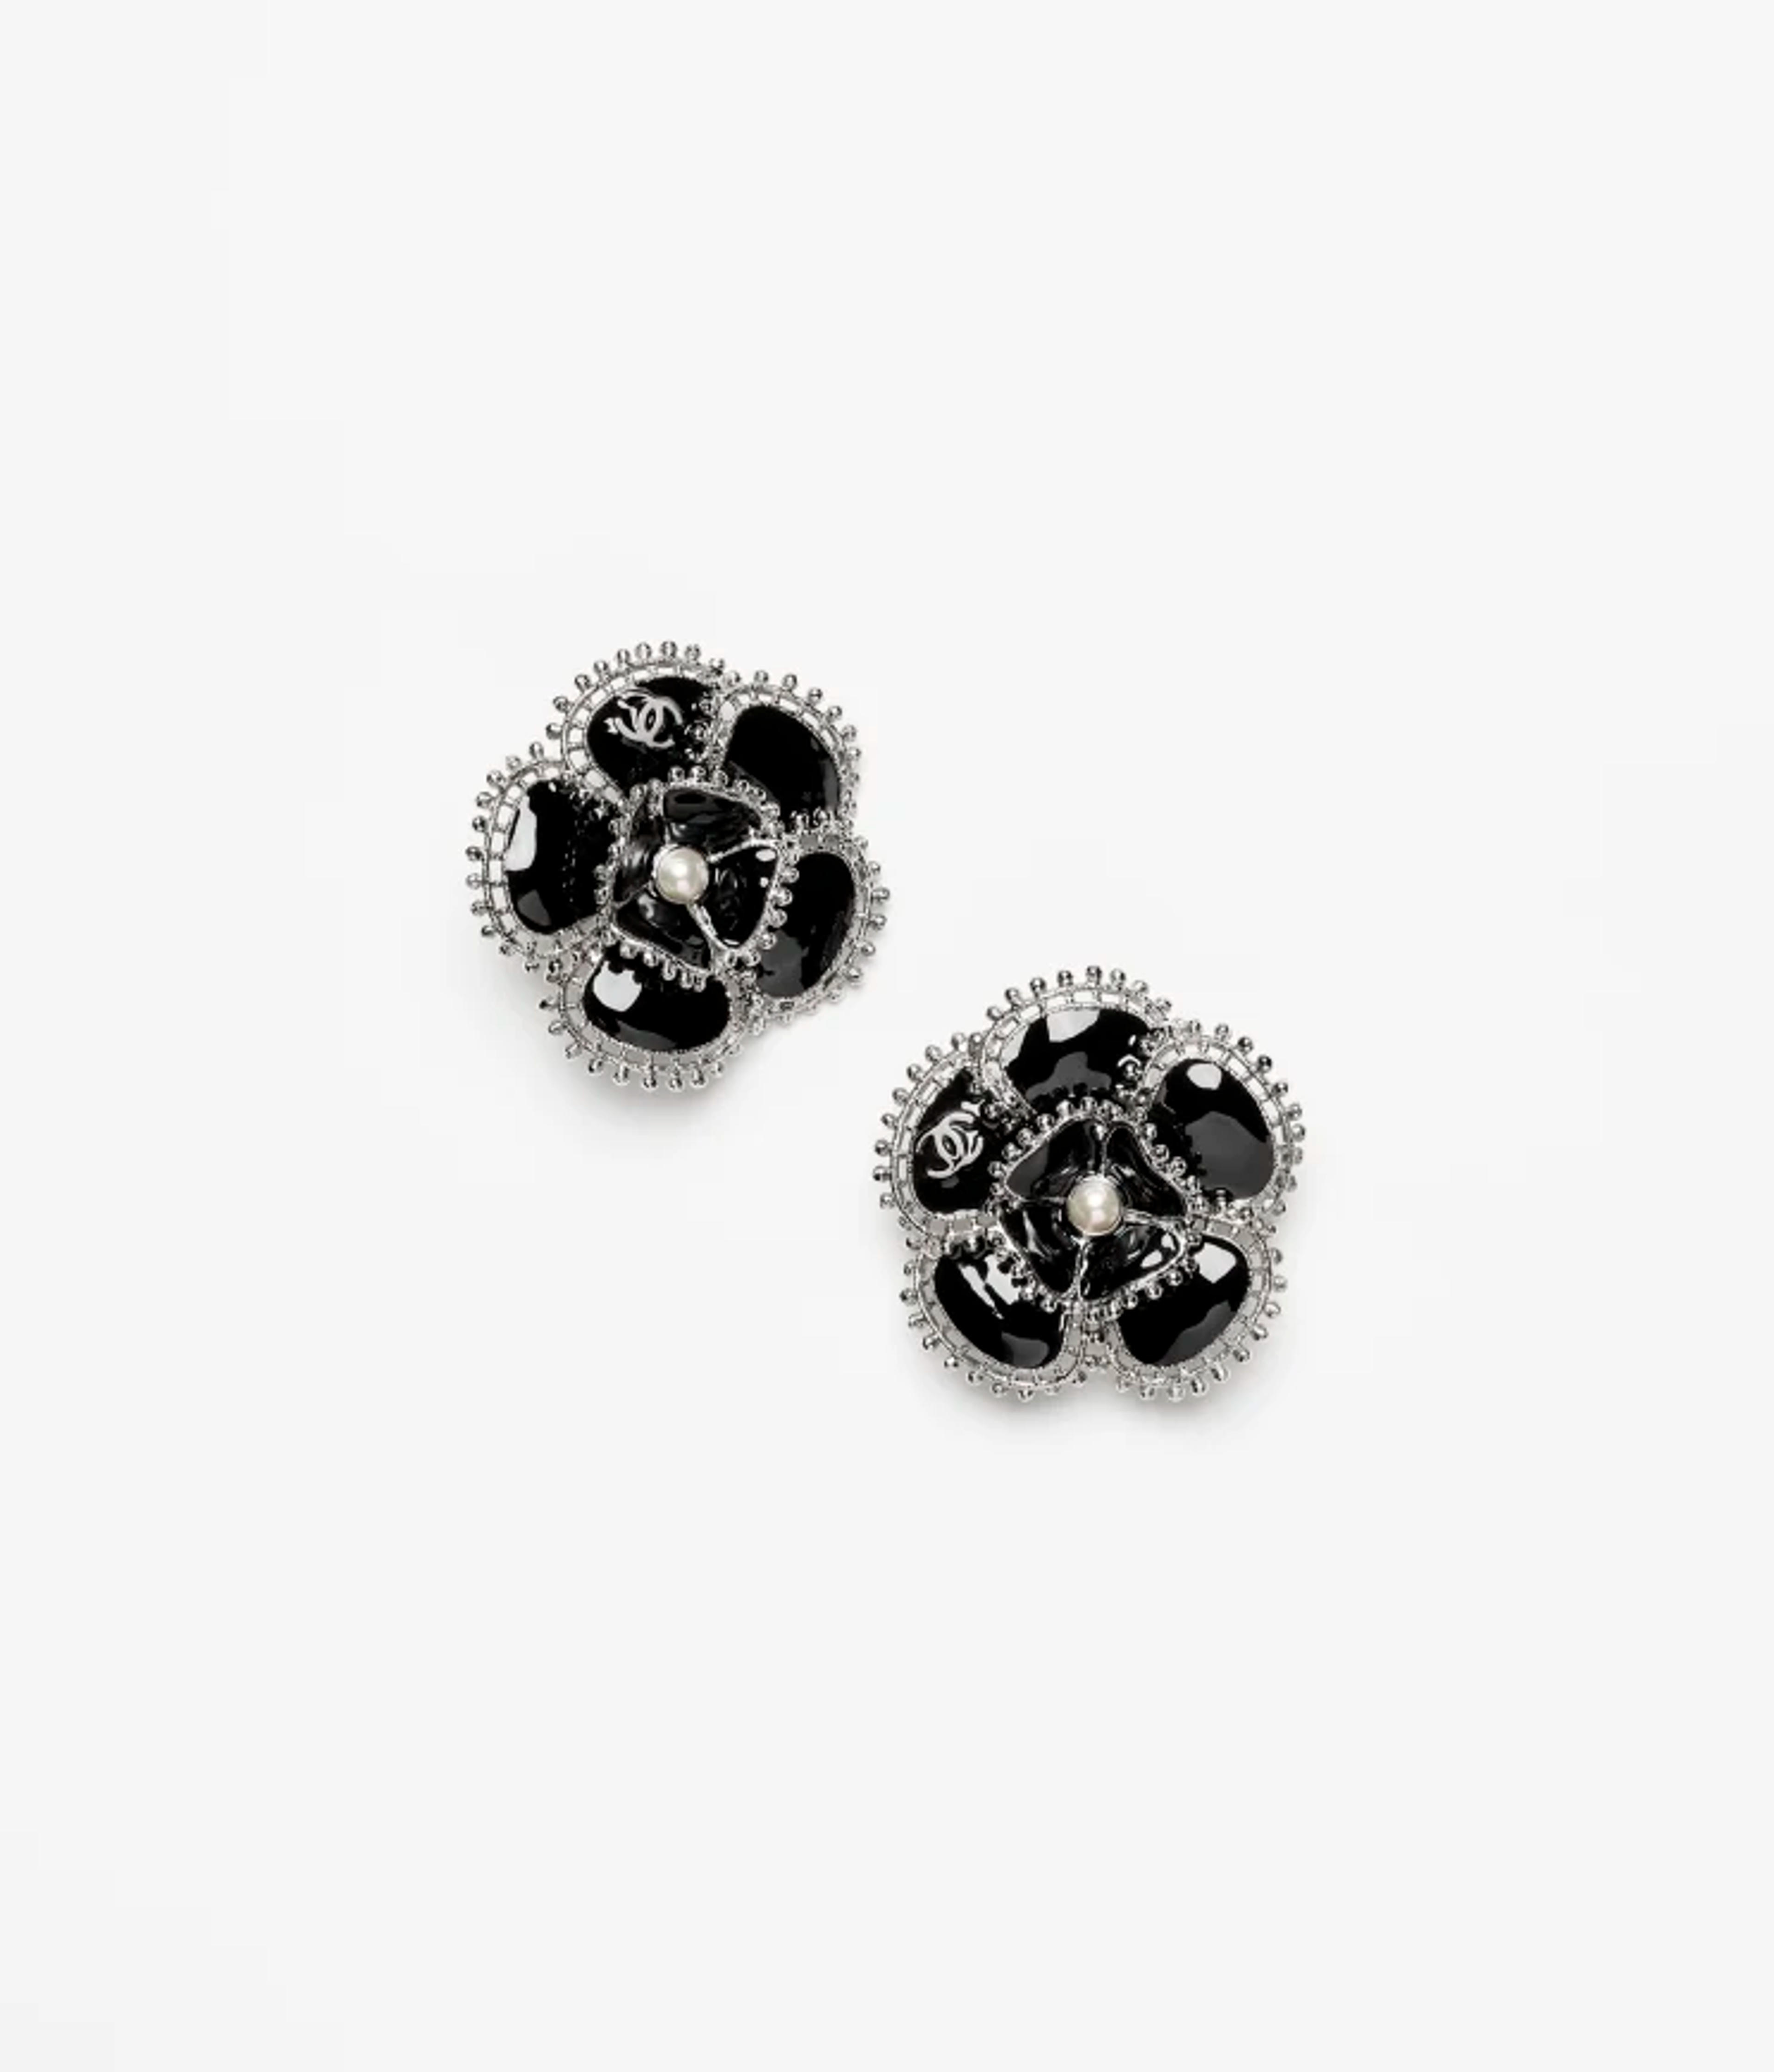 Clip-on stud earrings - Metal & glass pearls, silver, black & pearly white — Fashion | CHANEL